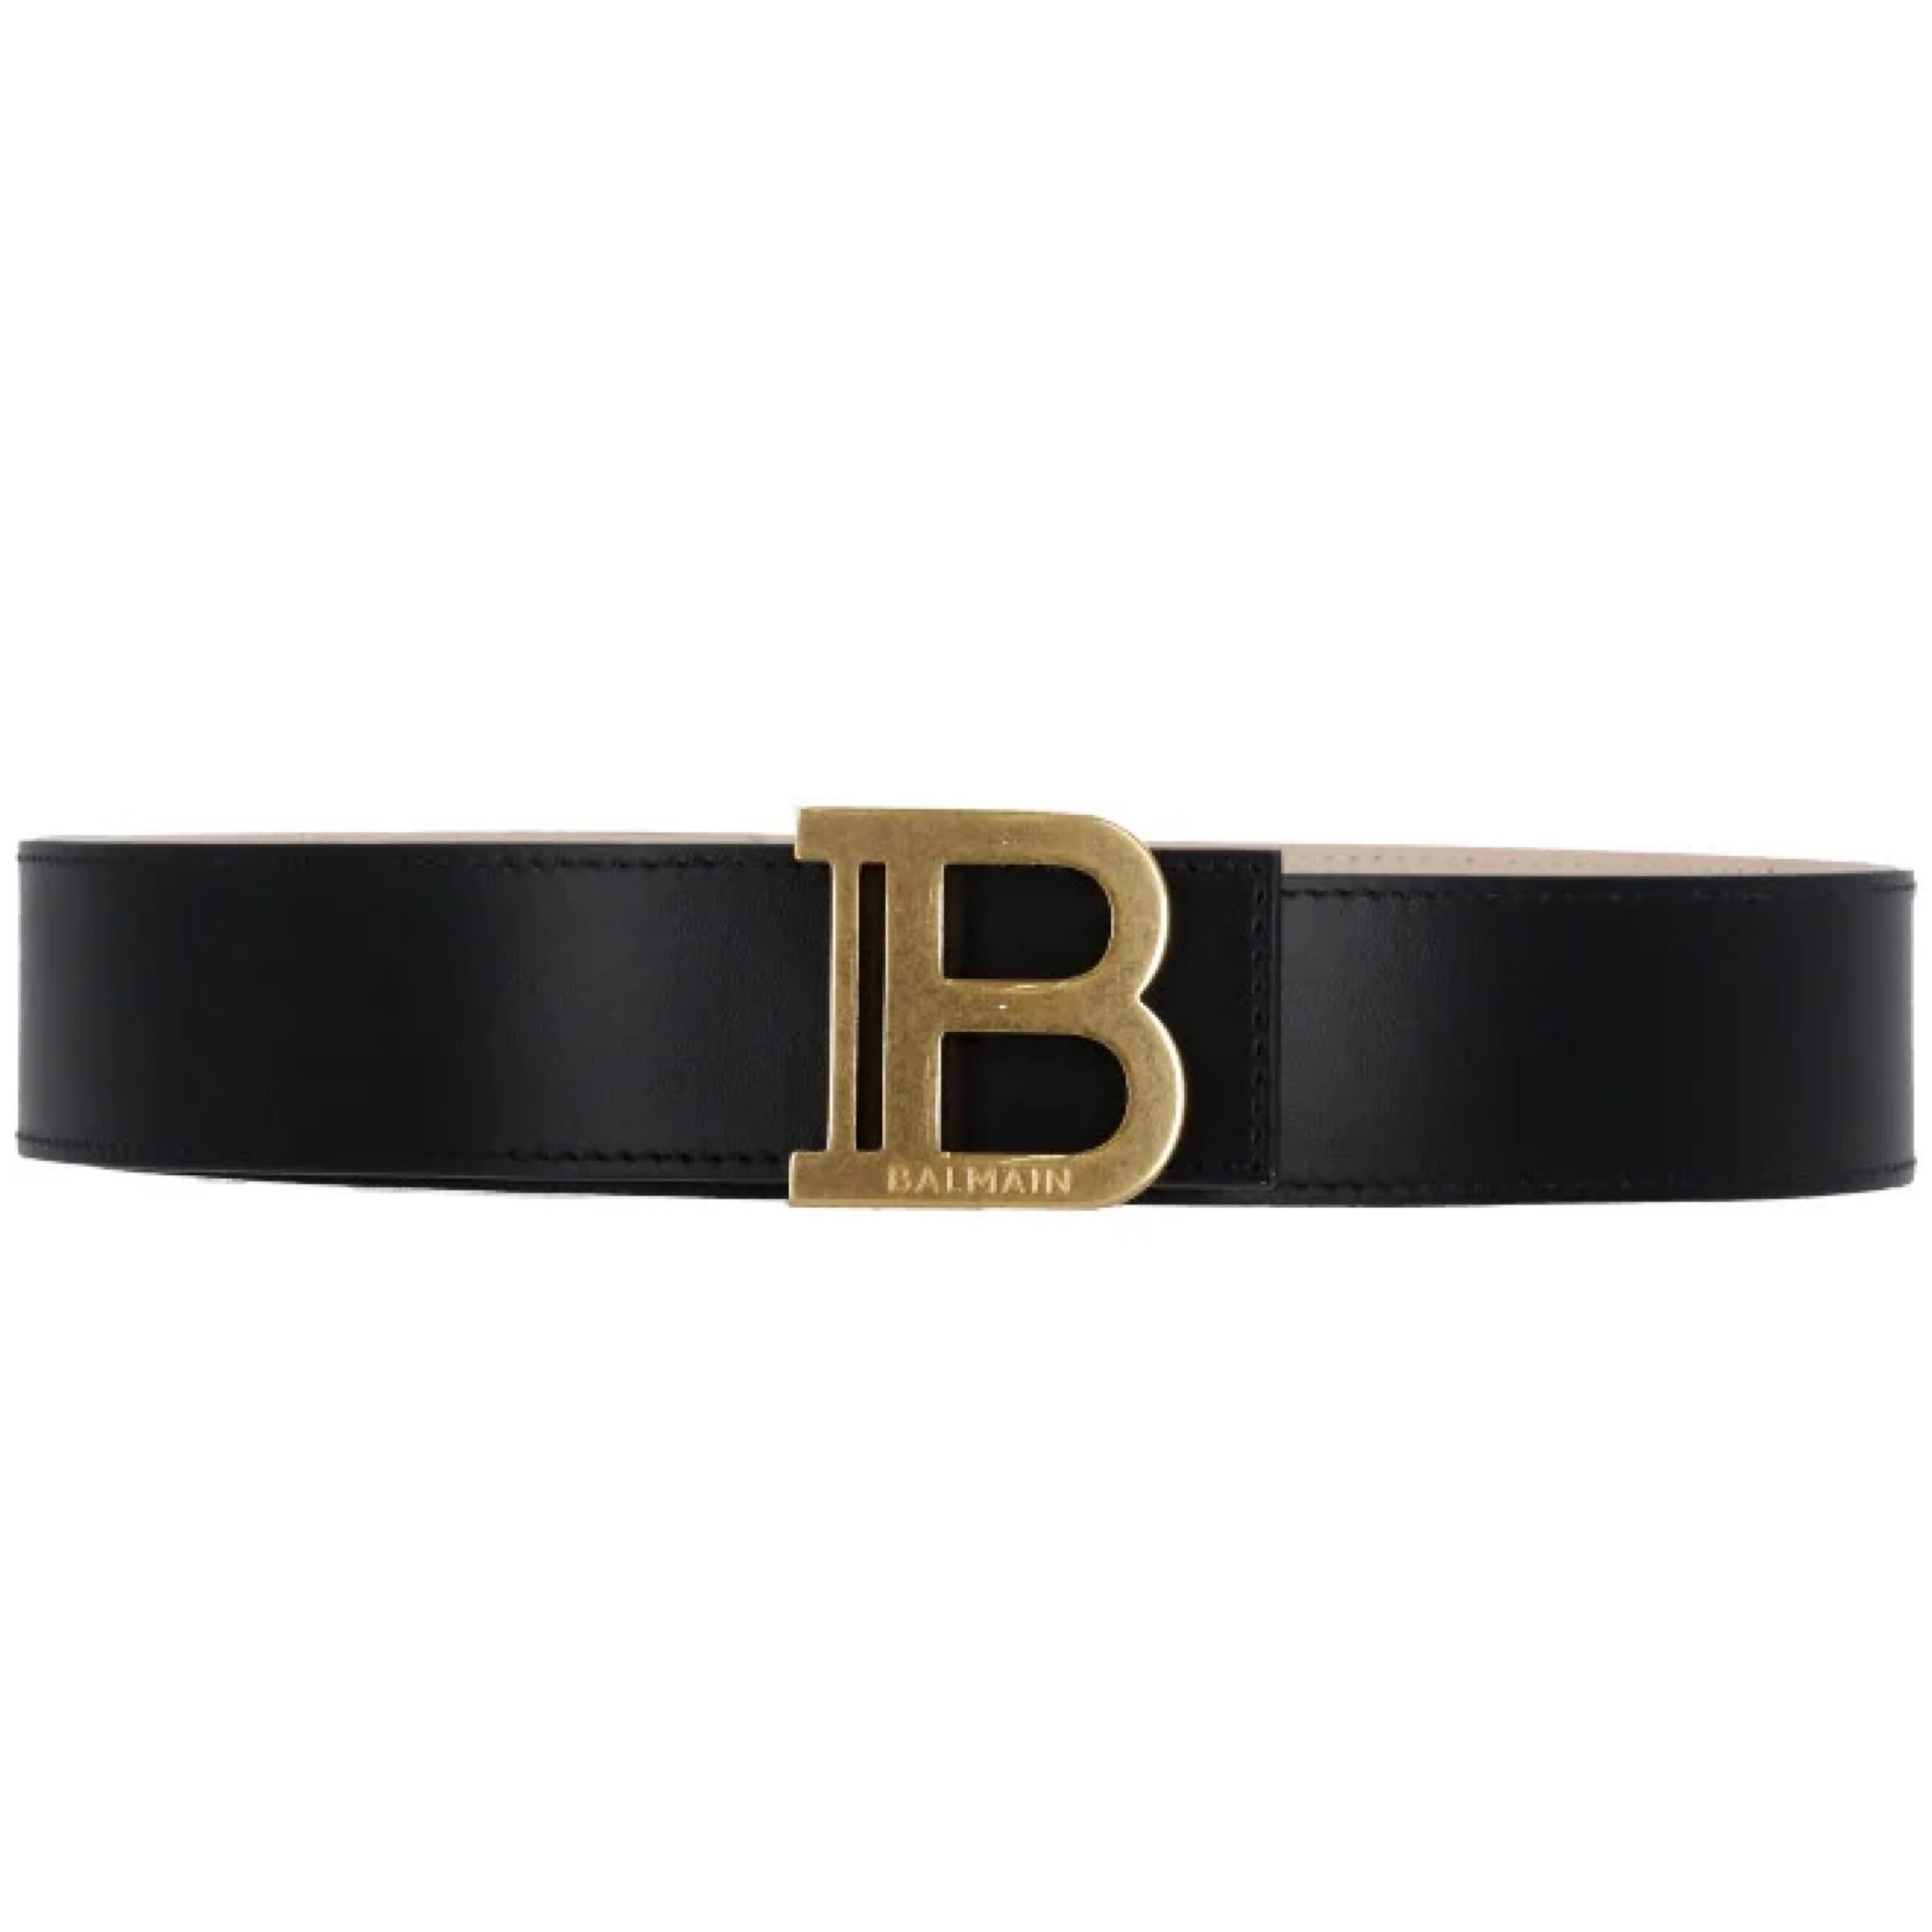 New Balmain Black B Logo Leather Belt Size 85 EU

Authenticity Guaranteed

DETAILS
Brand: Balmain
Condition: Brand new
Gender: Women
Category: Belt
Color: Black
Material: Leather
B logo buckle
Gold-tone hardware
Made in Italy
Includes: box, dust